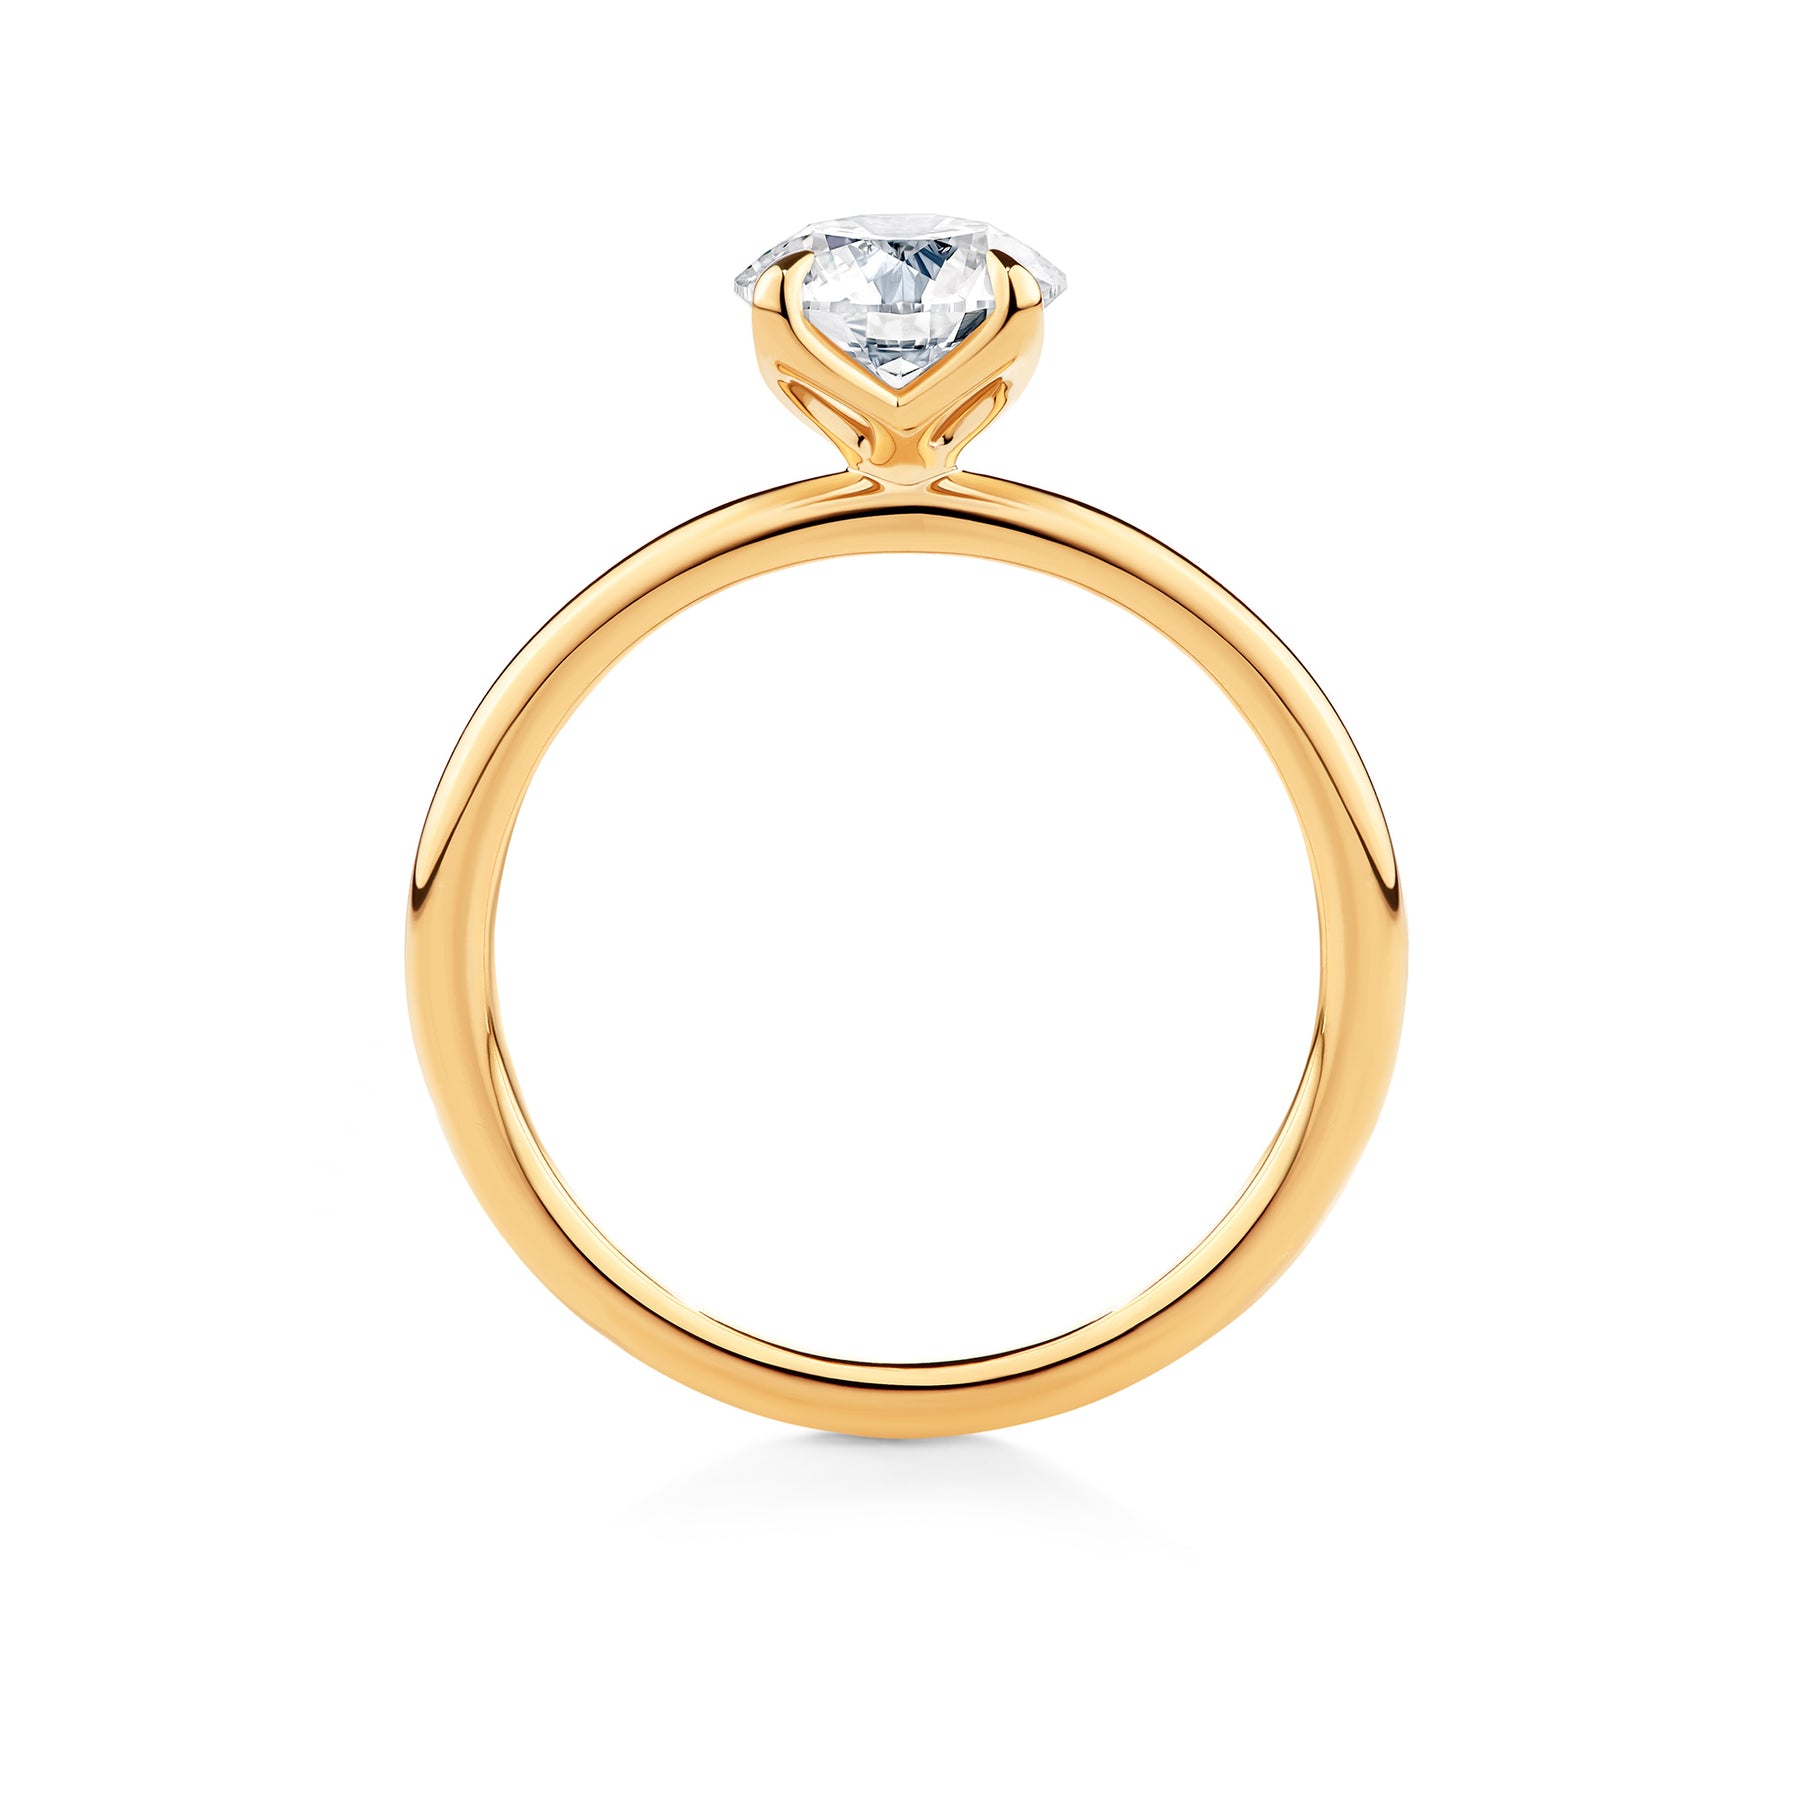 1.00ct Solitaire Oval-Cut GIA-Certified Lab Grown Diamond Engagement Ring in 18ct Yellow Gold